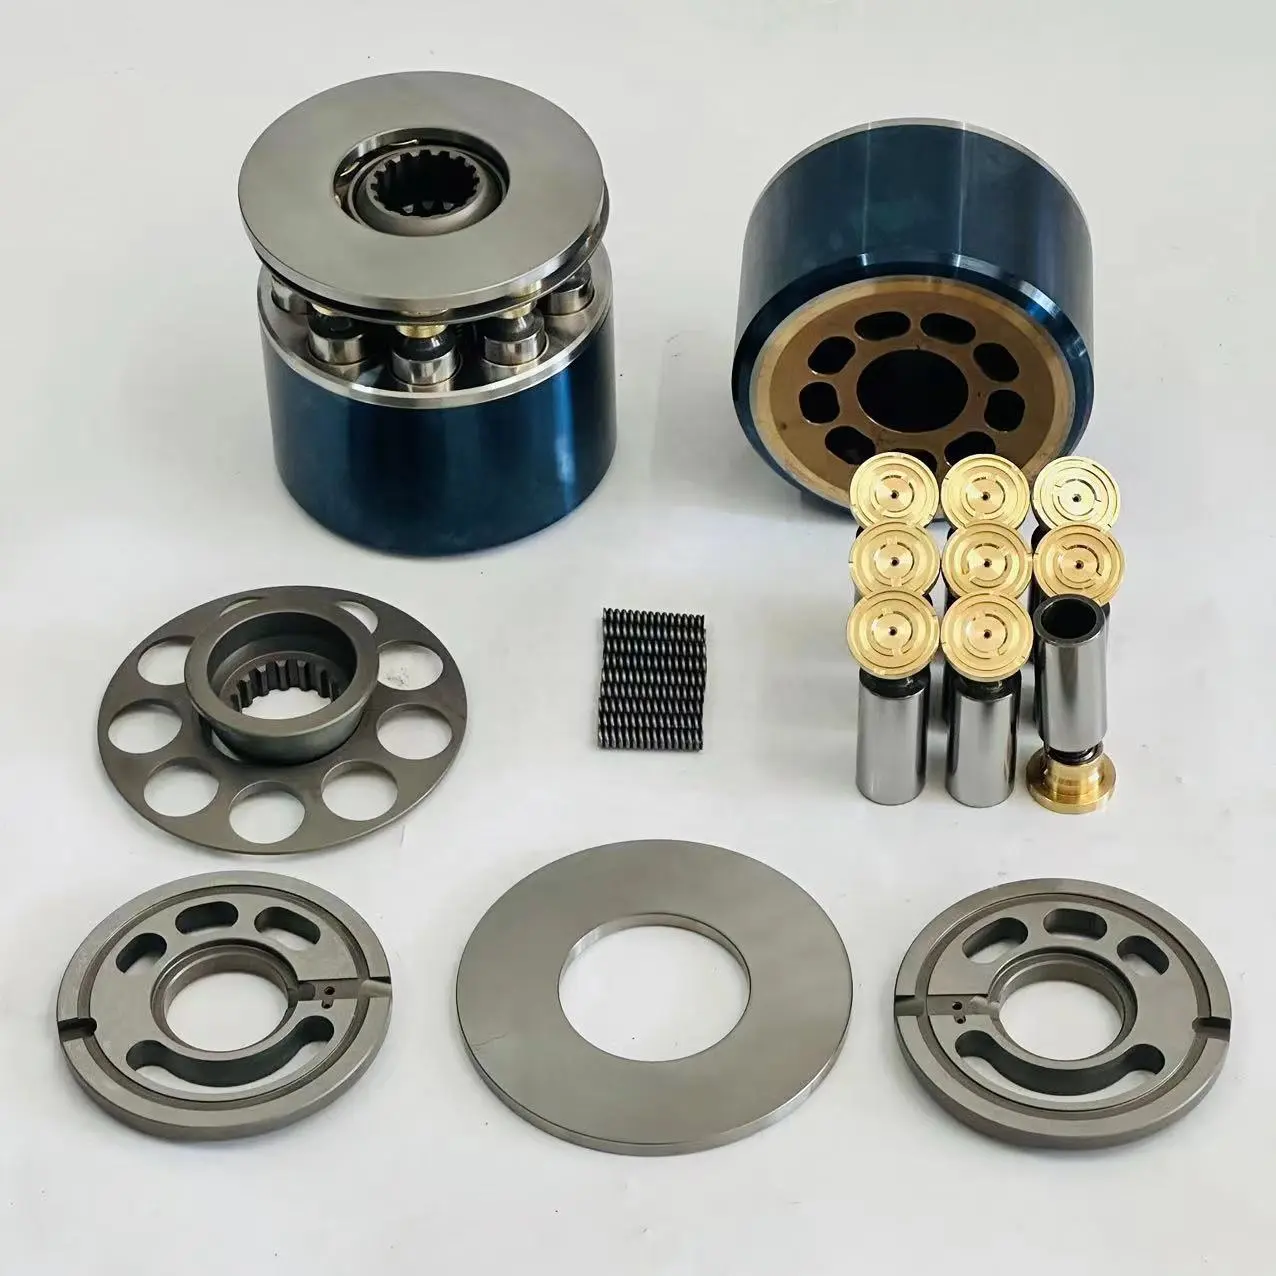 K5V200 hydraulic pump spare parts, piston shoe plate /cylinder block /swash plate/nine hole /spring /guide ball